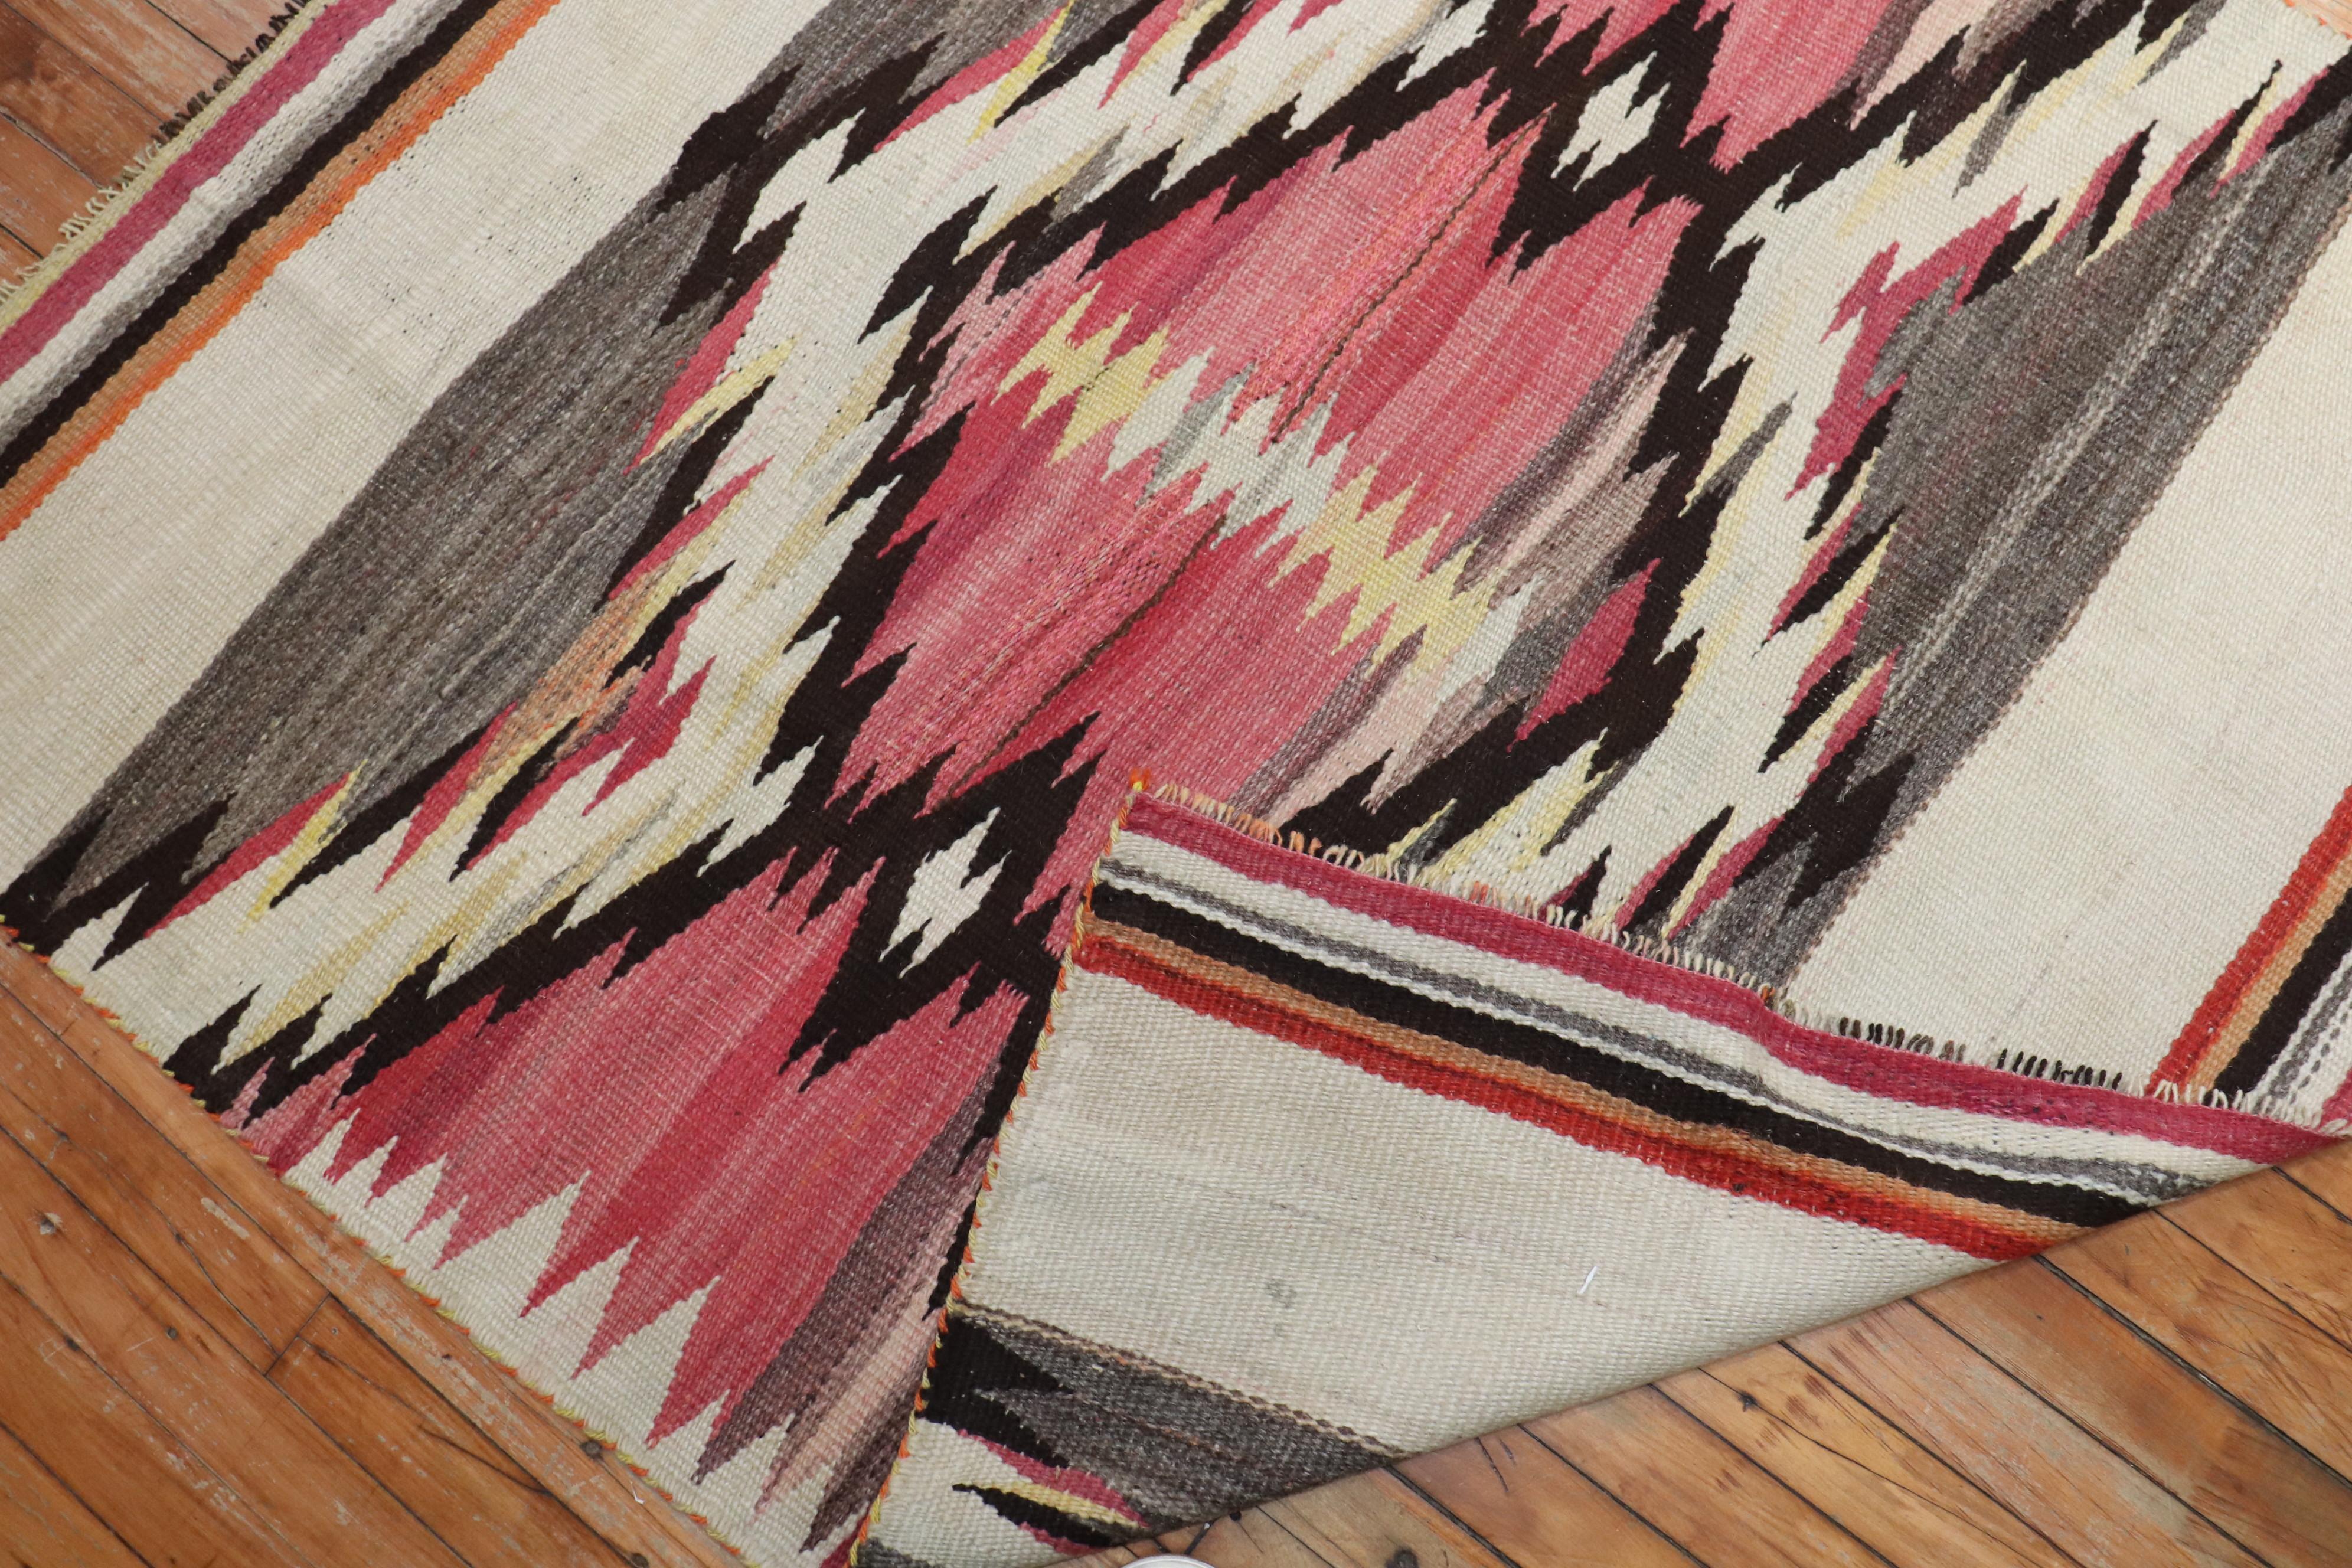 An early 20th century high decorative American Navajo rug featuring a tribal design in gray, pink, ivory, and brown


Measures: 4'2